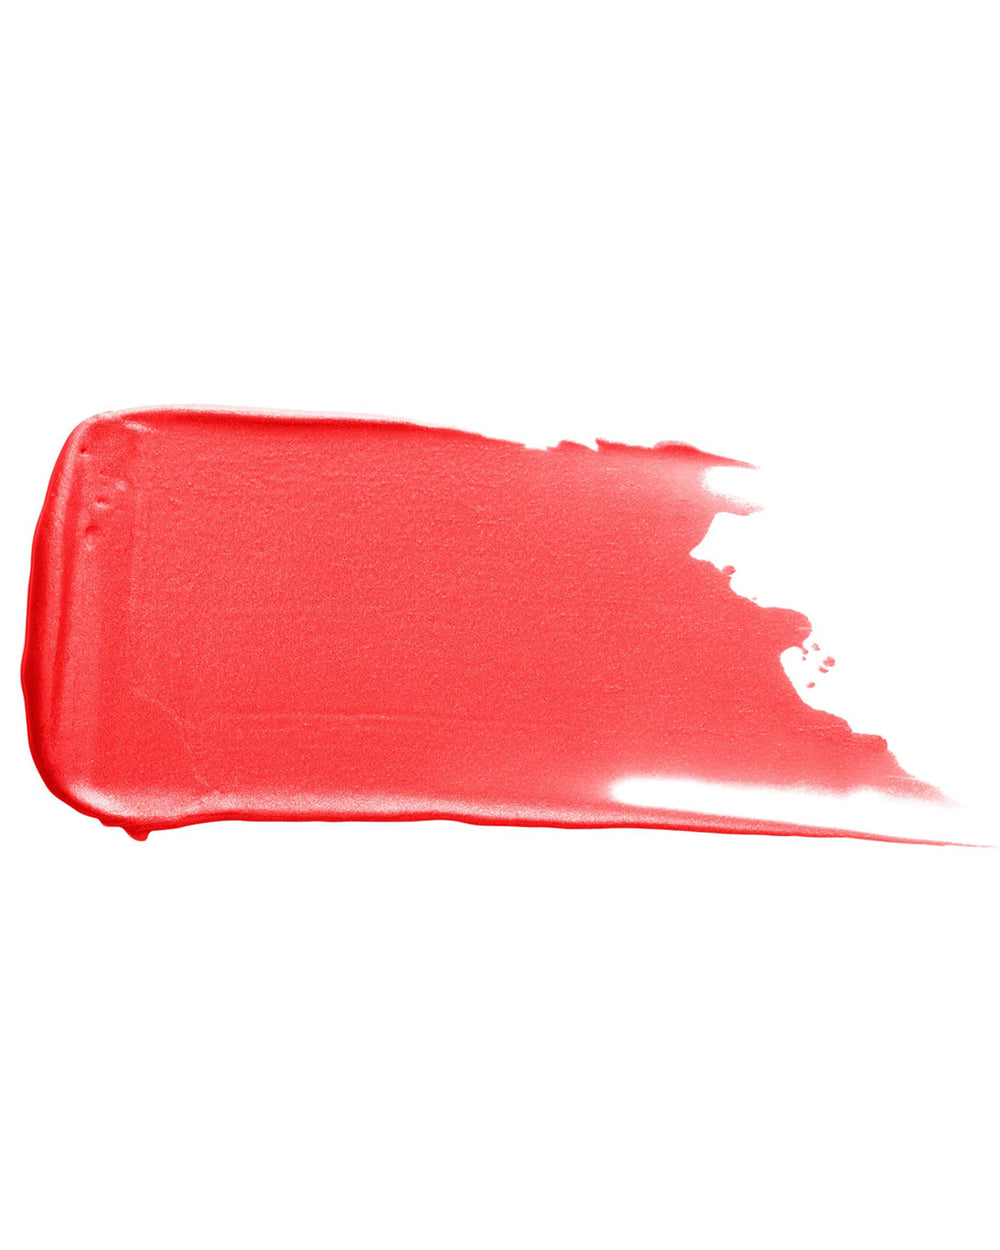 Paint Wash Liquid Lip Color in Coral Reef